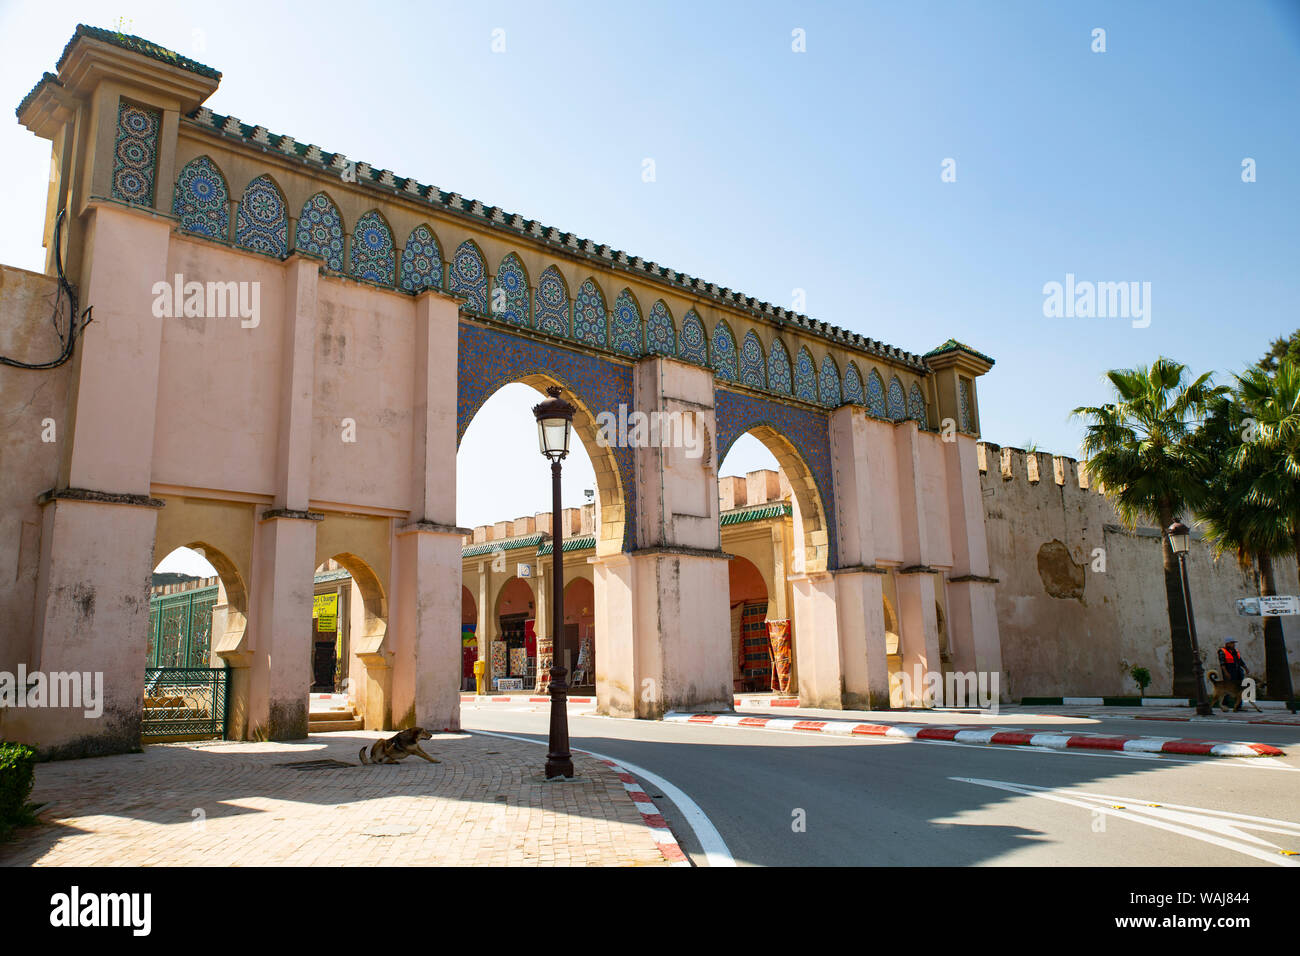 Meknes, Morocco. Mosaic tile gateway to the city and a dog Stock Photo